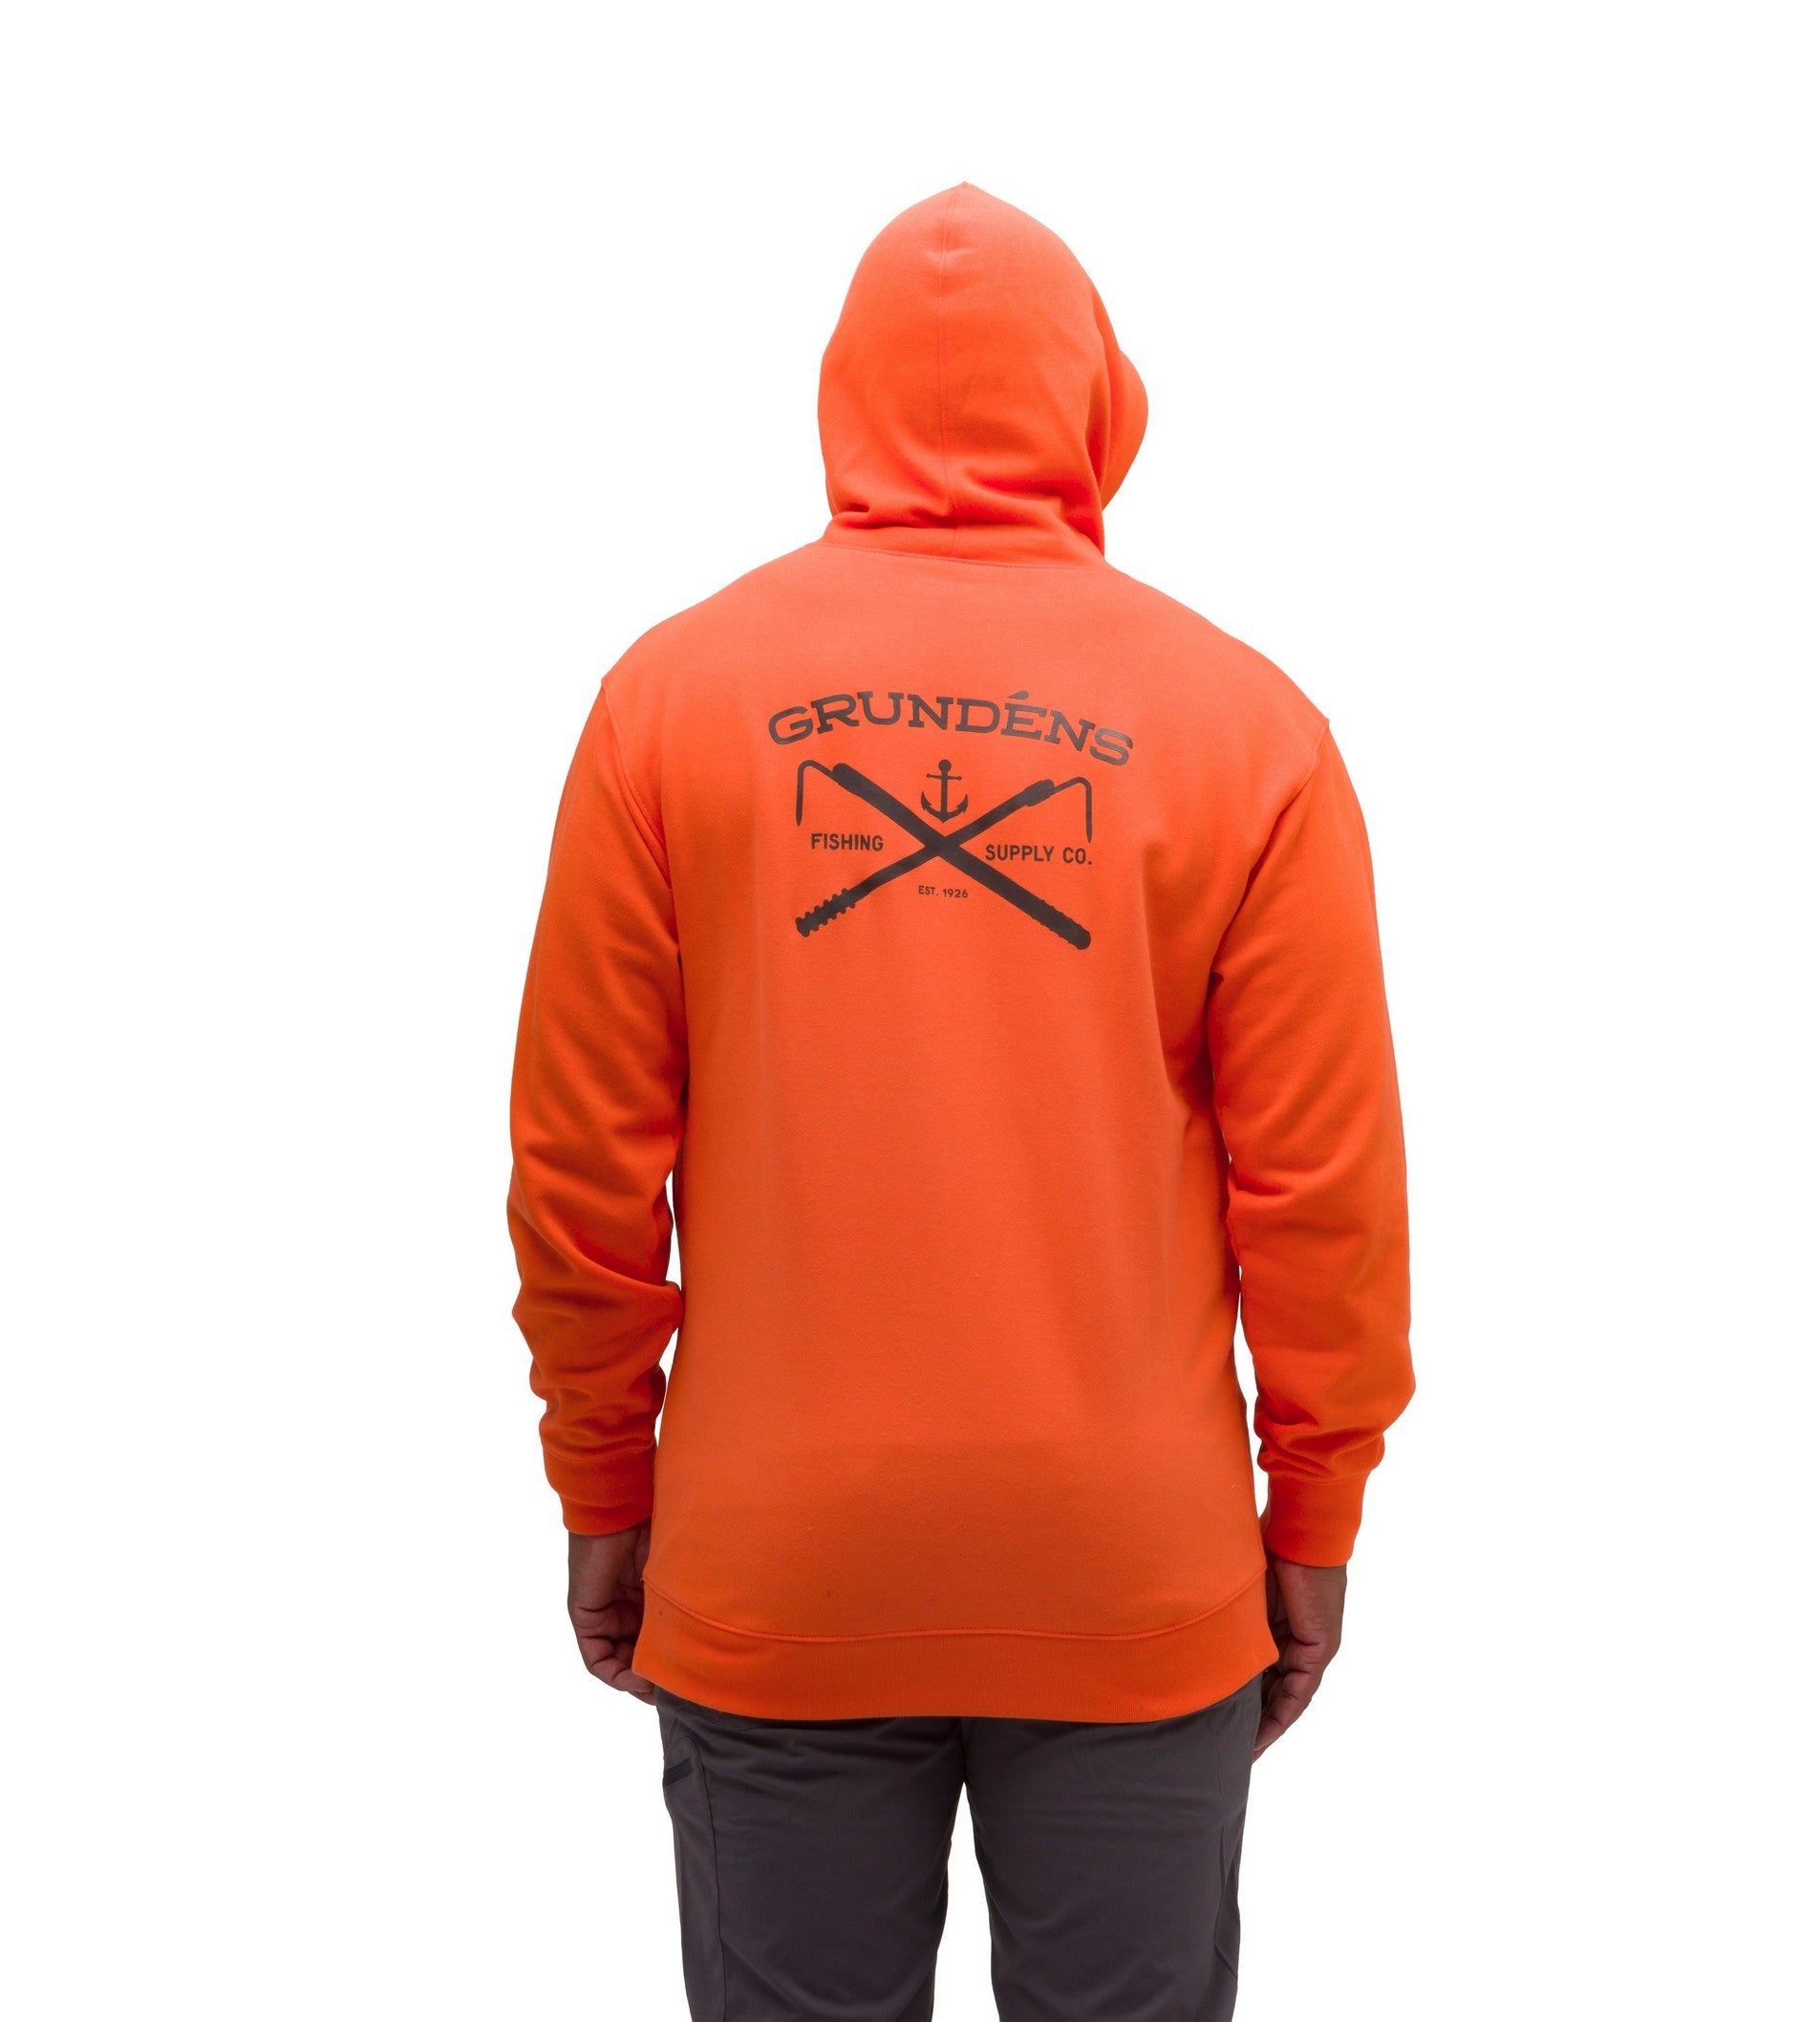 Grundens Deckhand Hoodie Review - Pro Tool Reviews